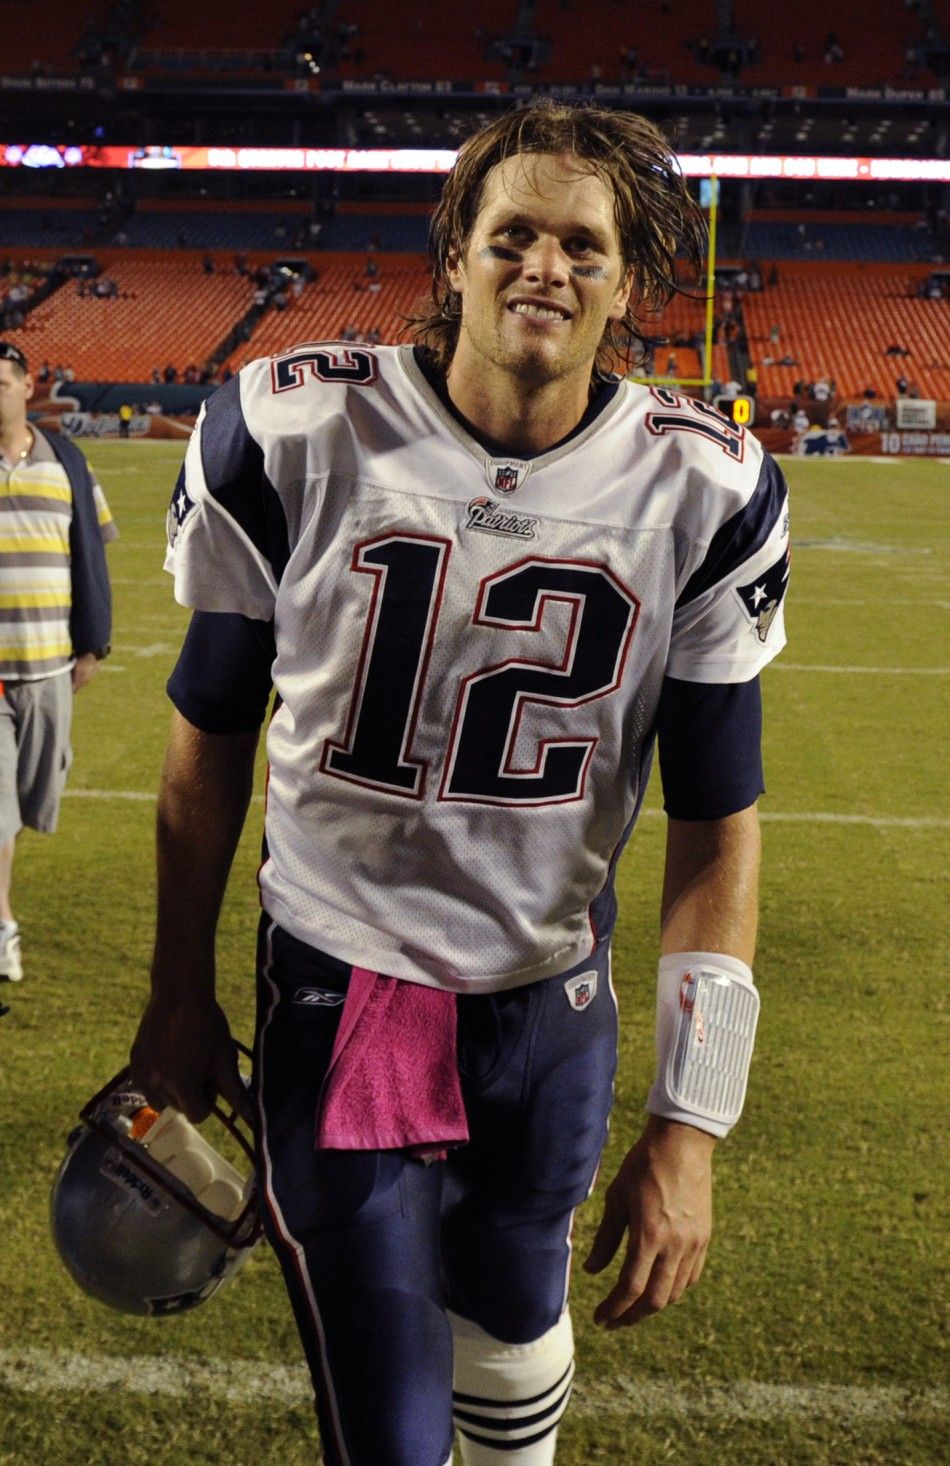 New England Patriots quarterback Tom Brady leaves the field after his teams win over the Miami Dolphins in their NFL football game in Miami, Florida October 4, 2010.